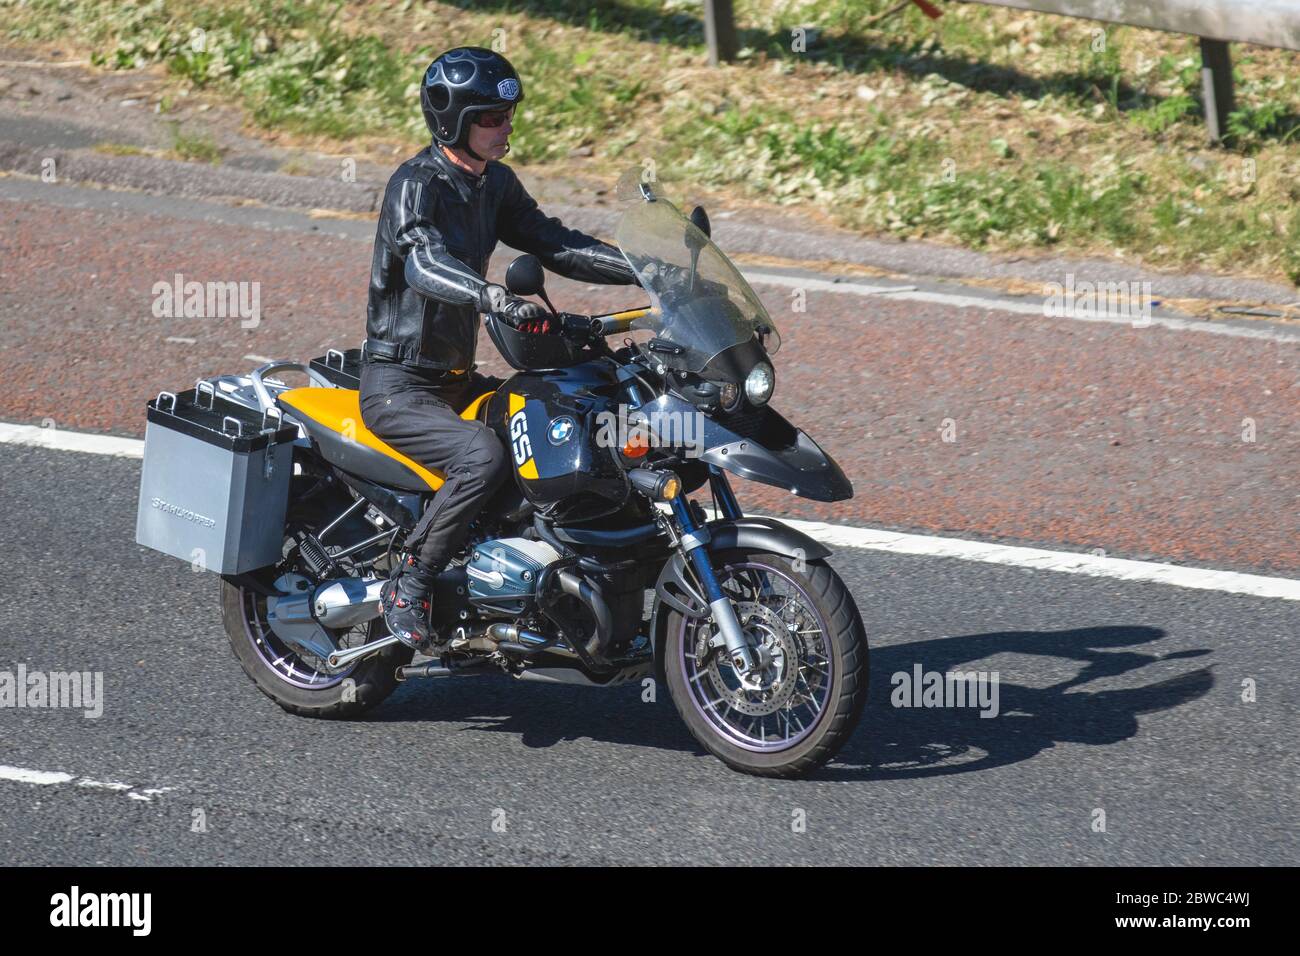 Page 3 - Bmw Gs High Resolution Stock Photography and Images - Alamy